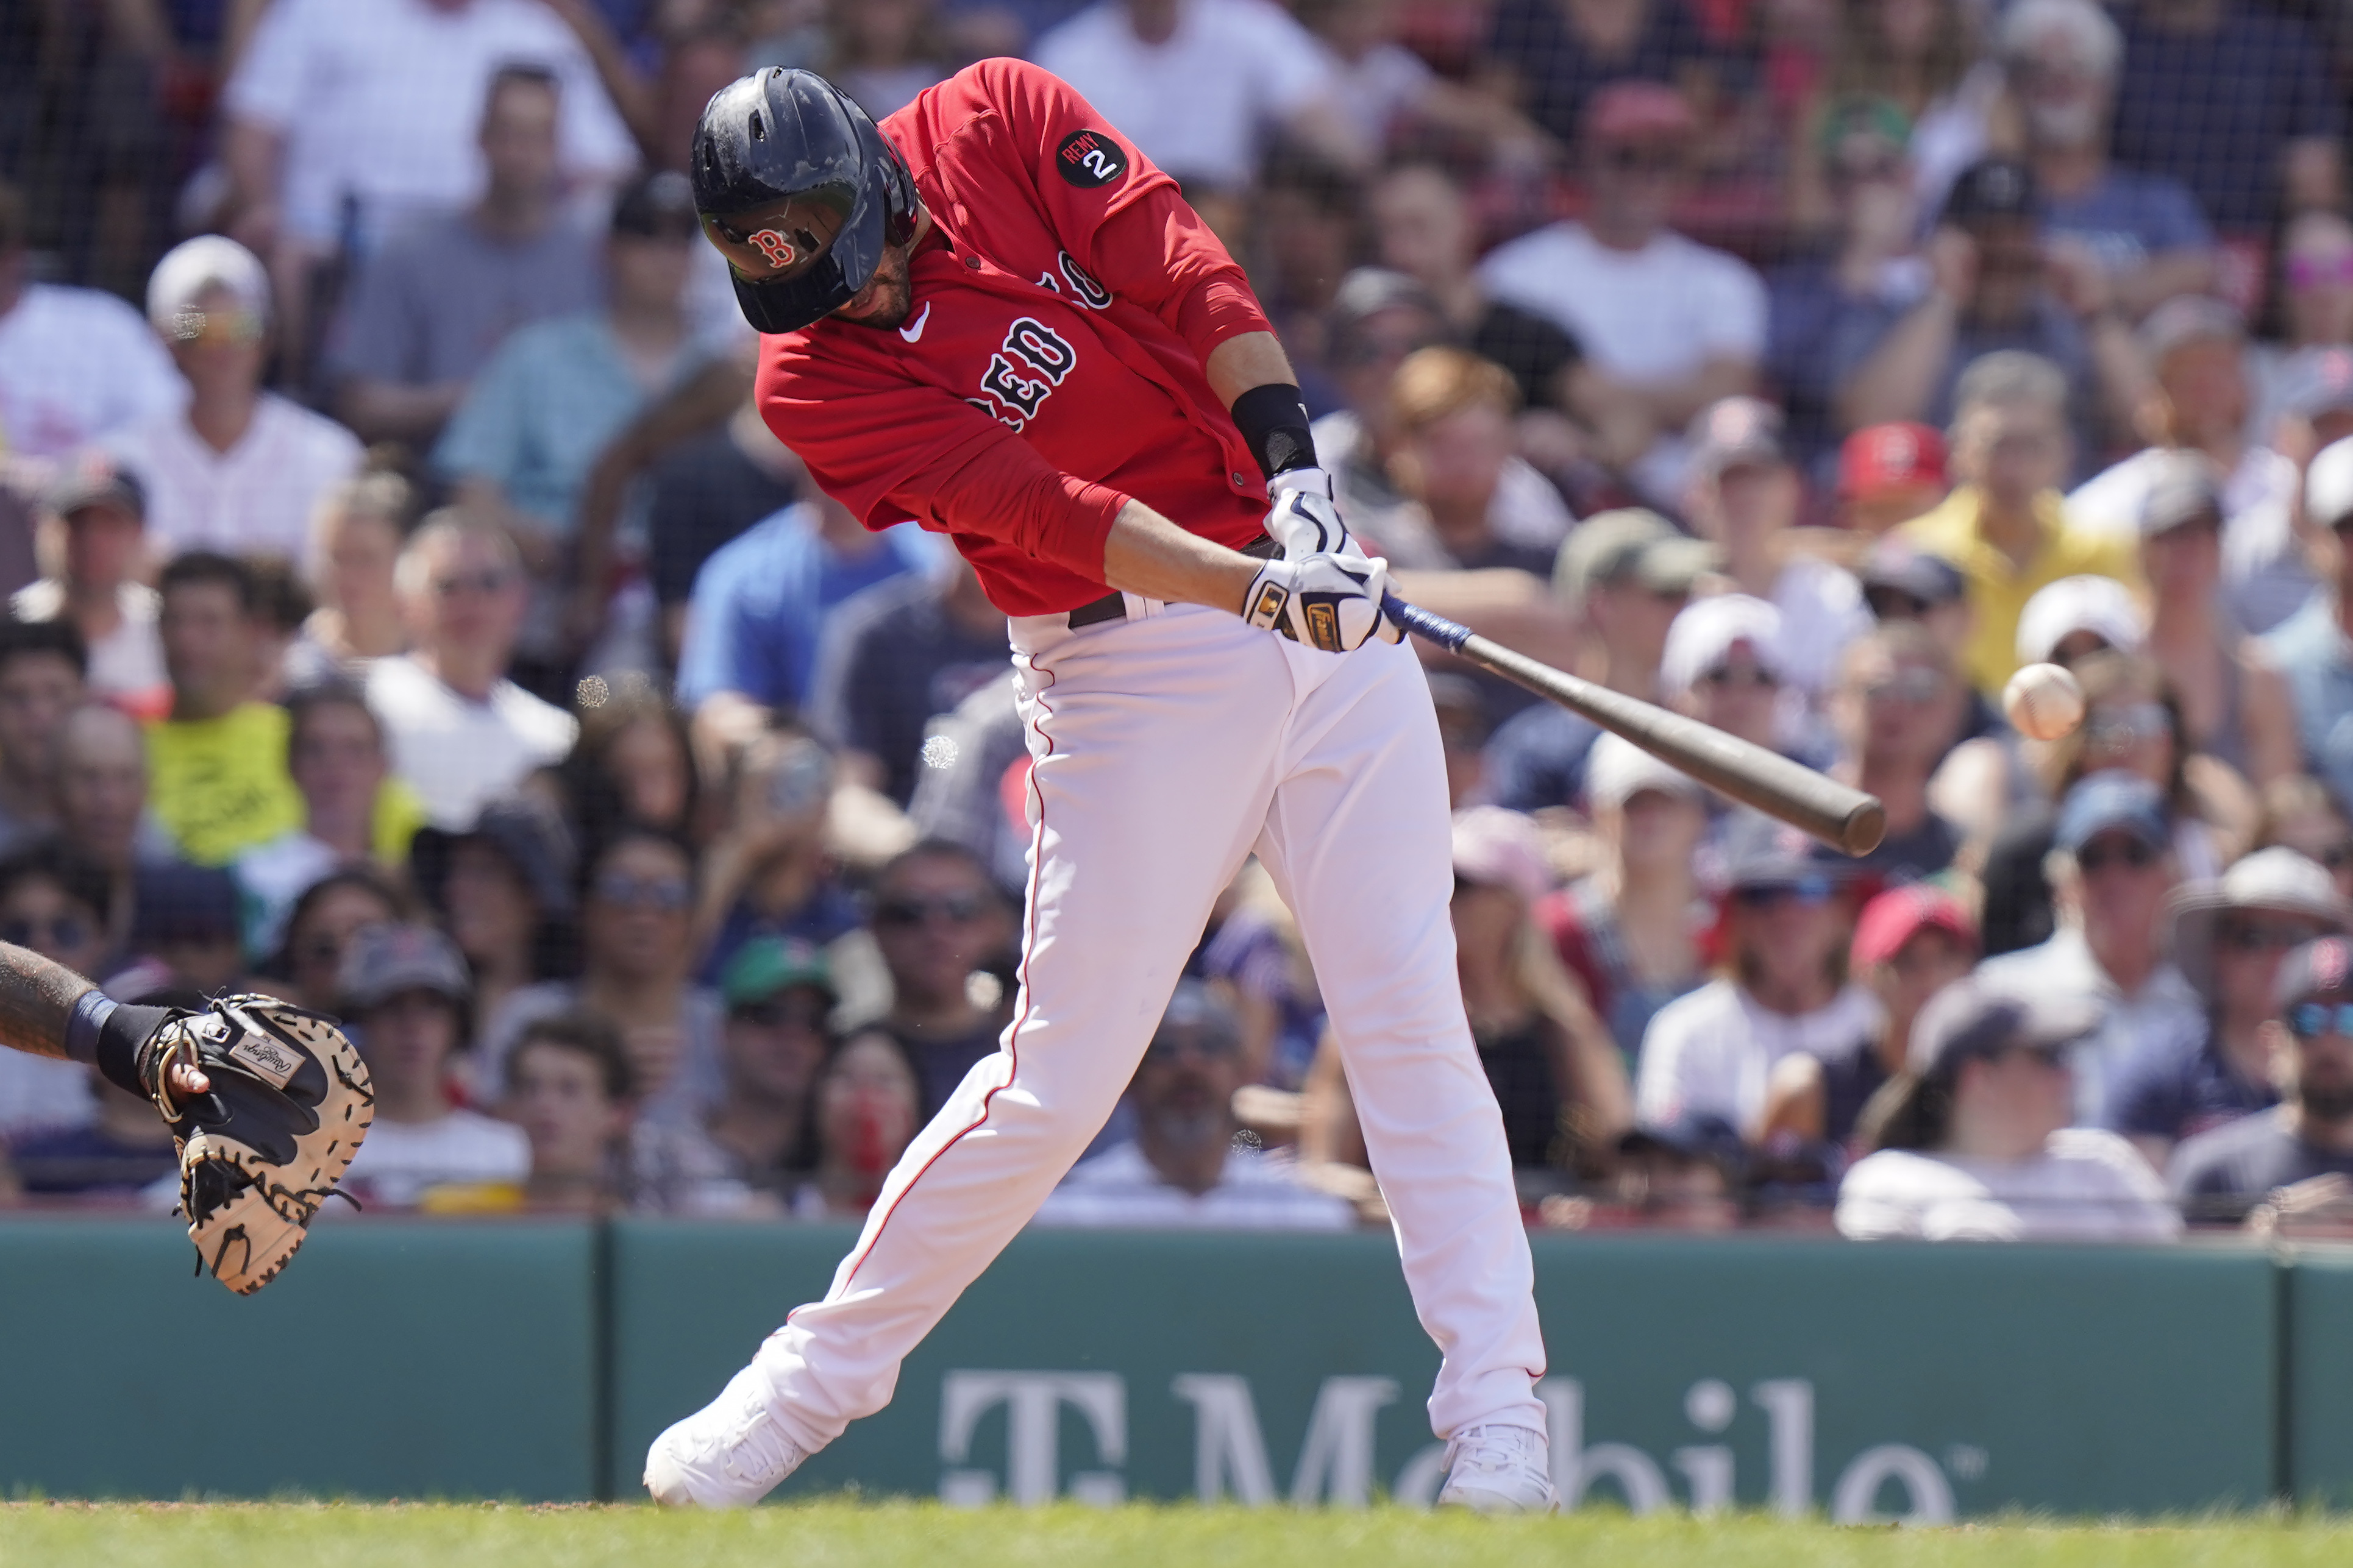 MLB trade deadline: Red Sox' J.D. Martinez reportedly receiving interest  from Dodgers, Mets